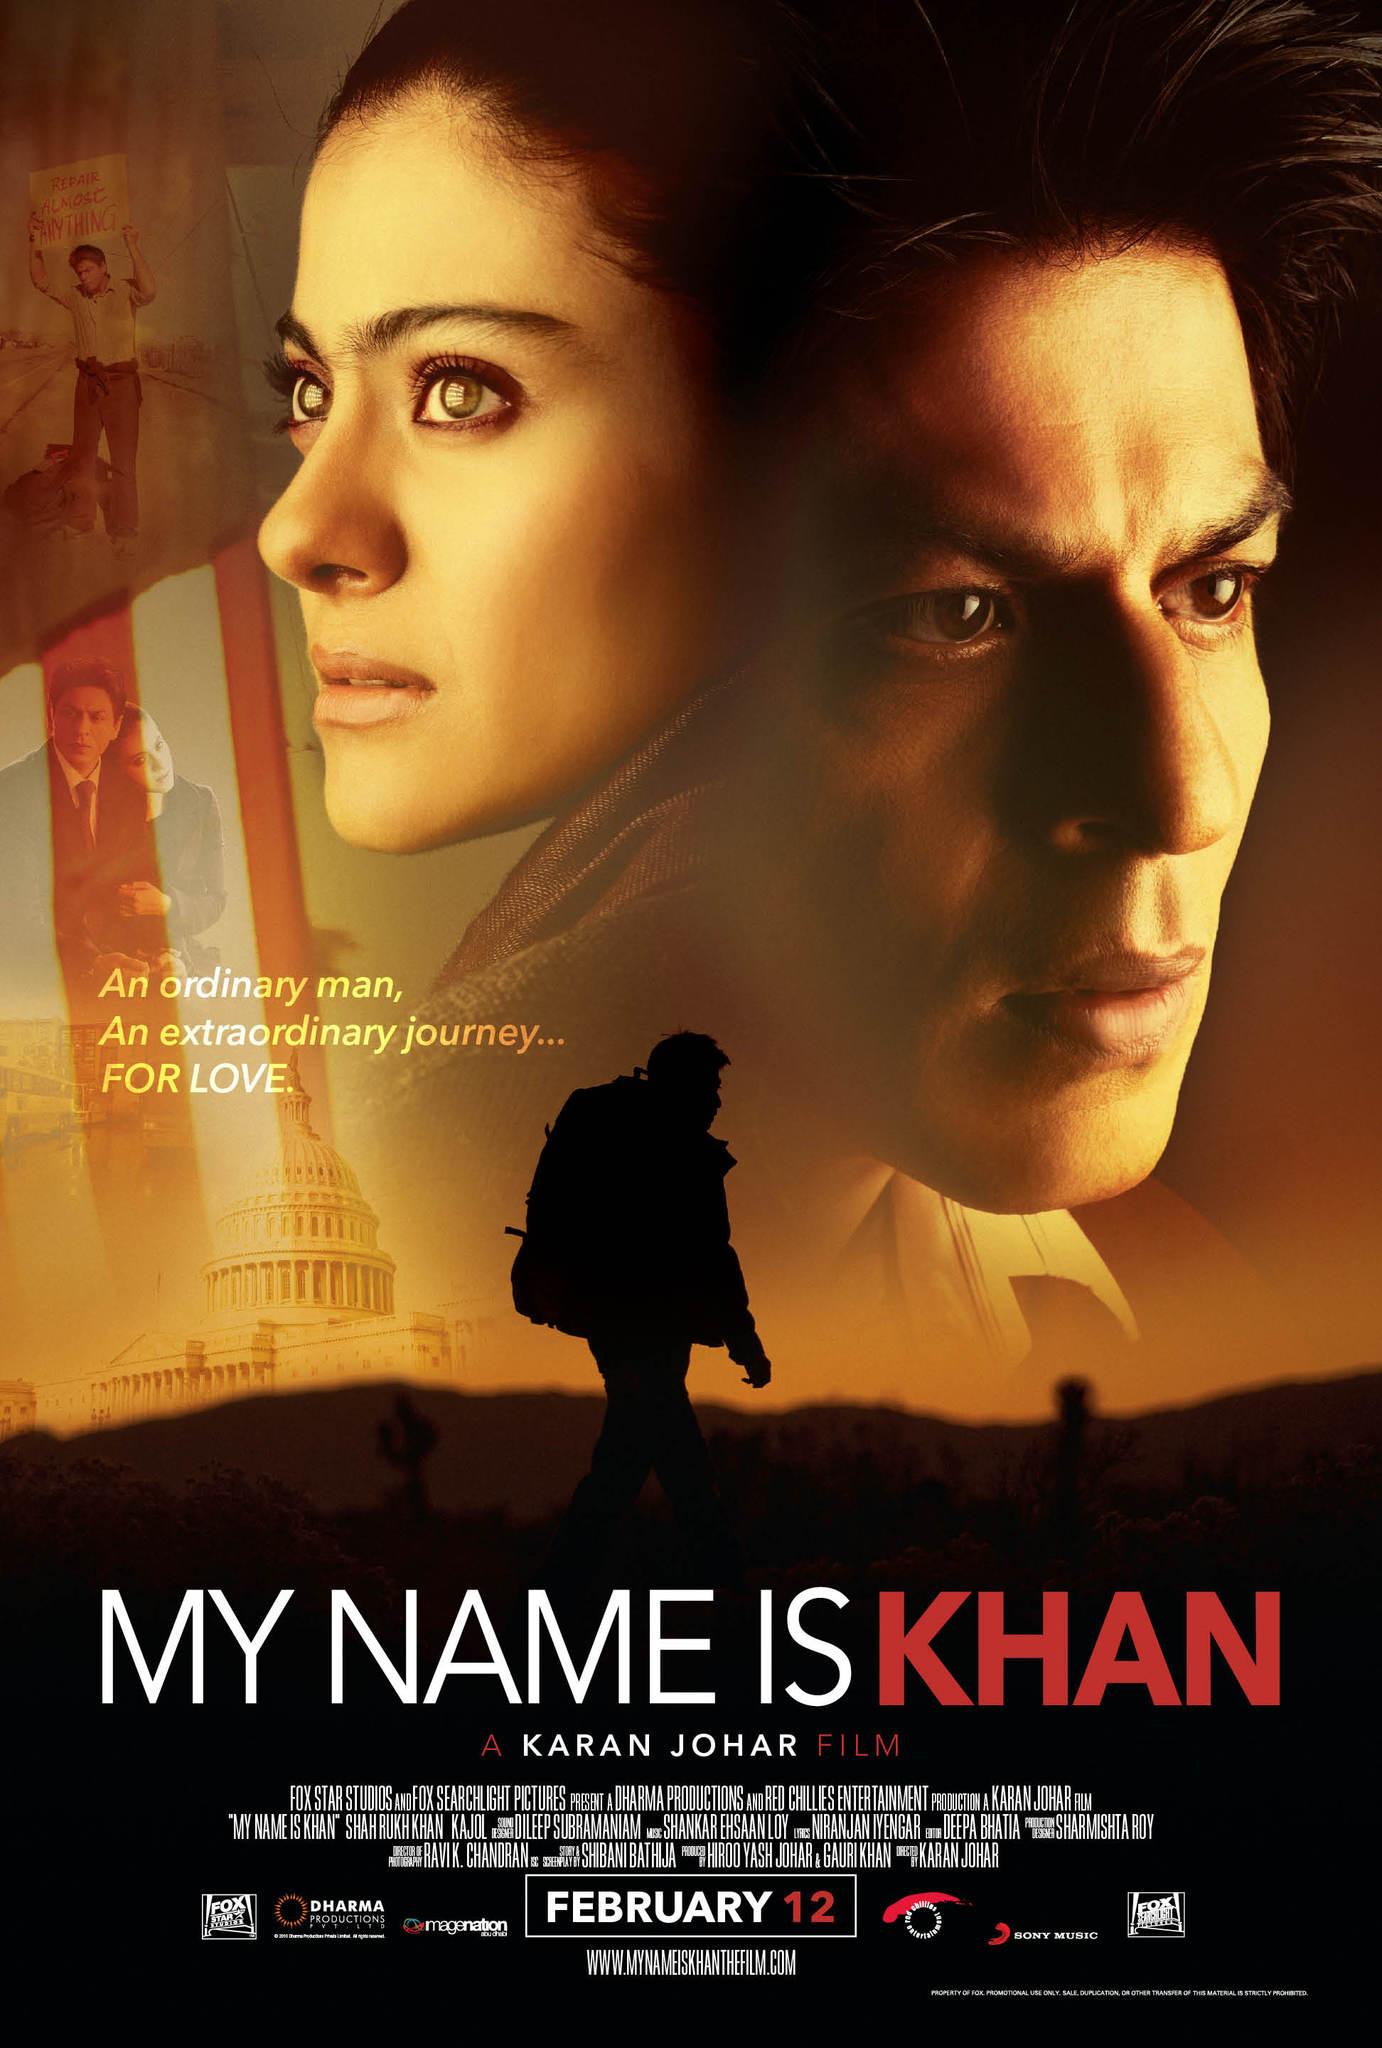 My Name Is Khan (2010) beautifully portrays the journey of cross-cultural love amidst challenging circumstances. Rizwan Khan (played by Shah Rukh Khan), a Muslim man with Asperger's syndrome, finds love and companionship with Mandira (portrayed by Kajol), his Hindu wife. The couple's love story is met with tragic incidents that test their bond and resilience.